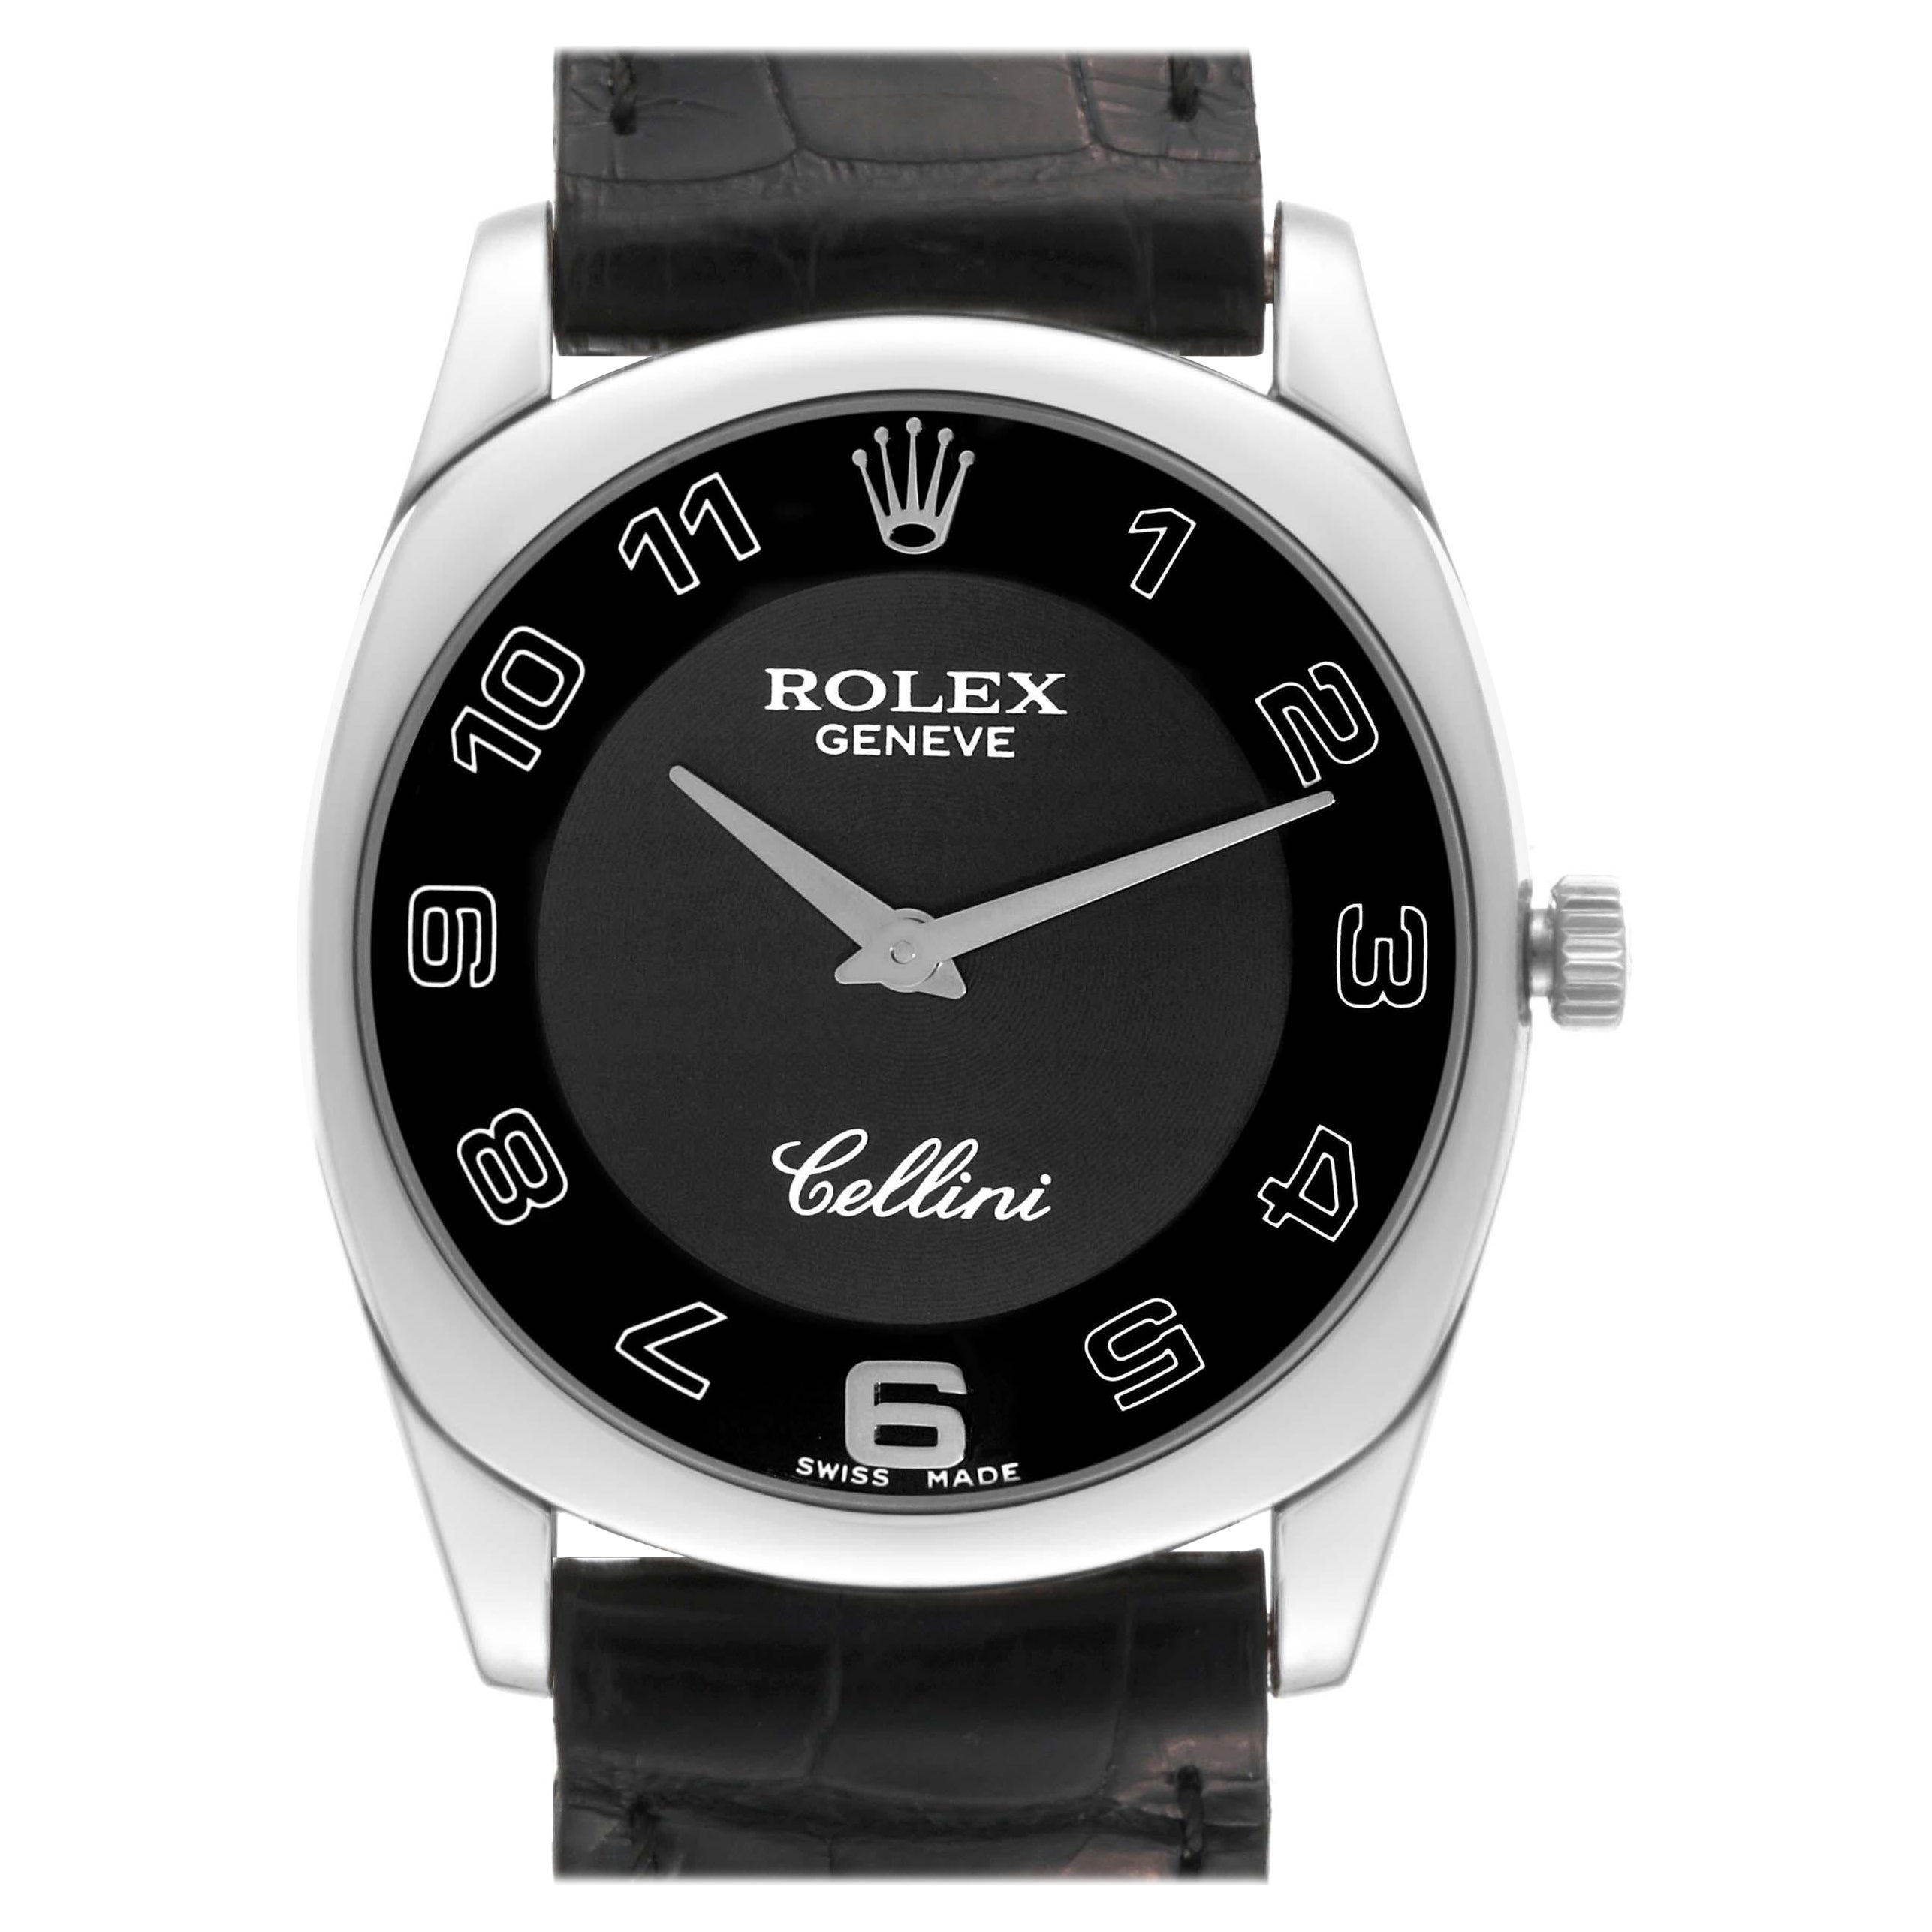 Rolex Cellini Danaos 18K White Gold Black Dial Mens Watch 4233 Papers For Sale